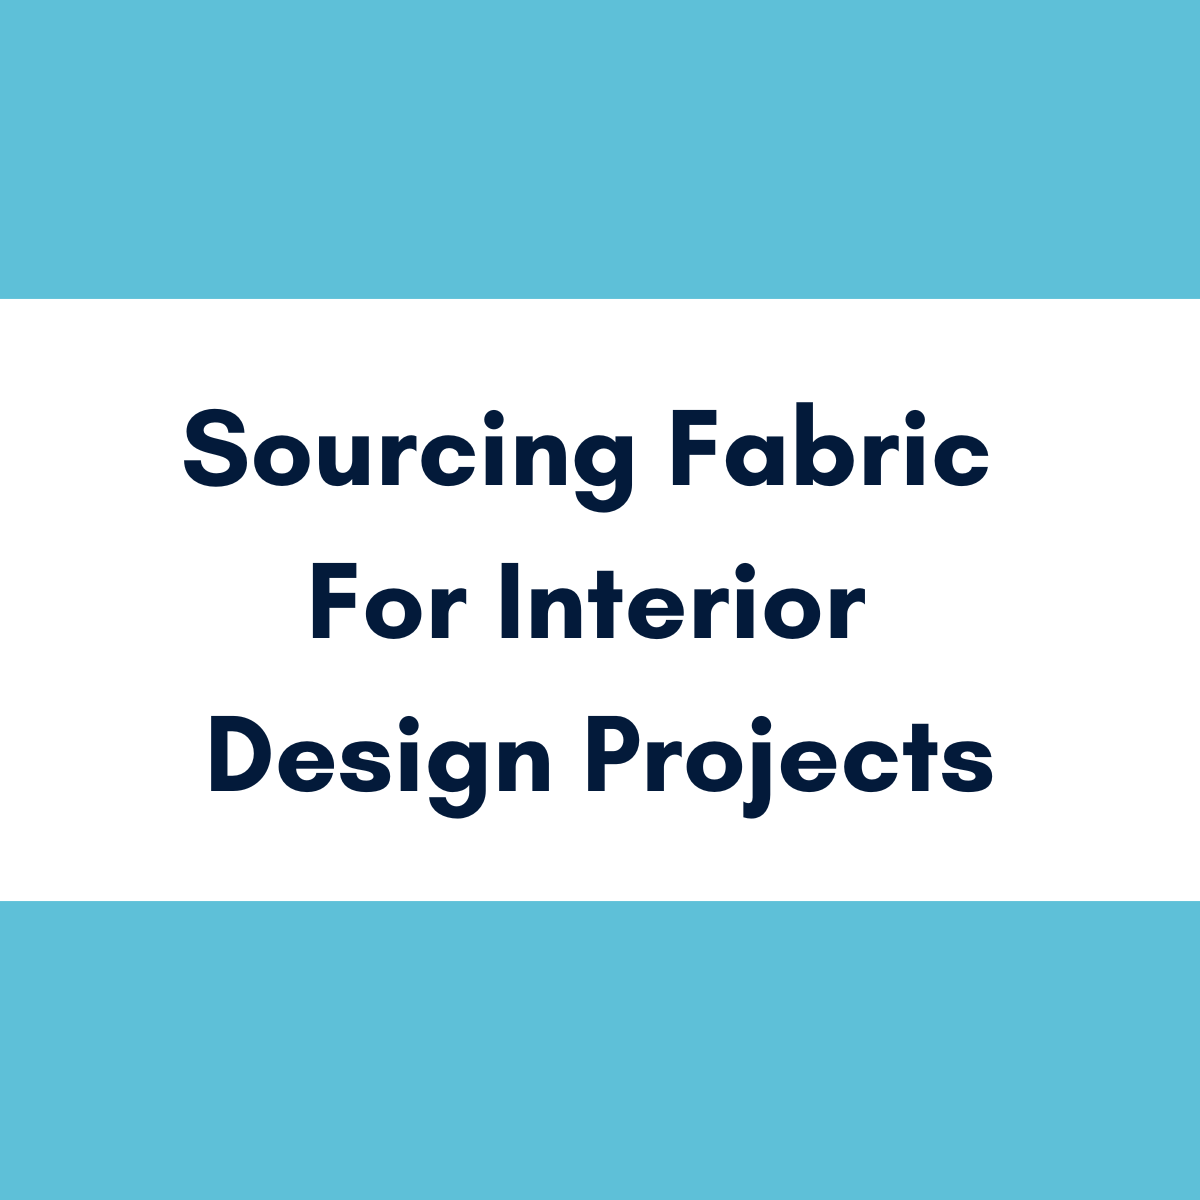 Sourcing Fabric for Interior Design Projects